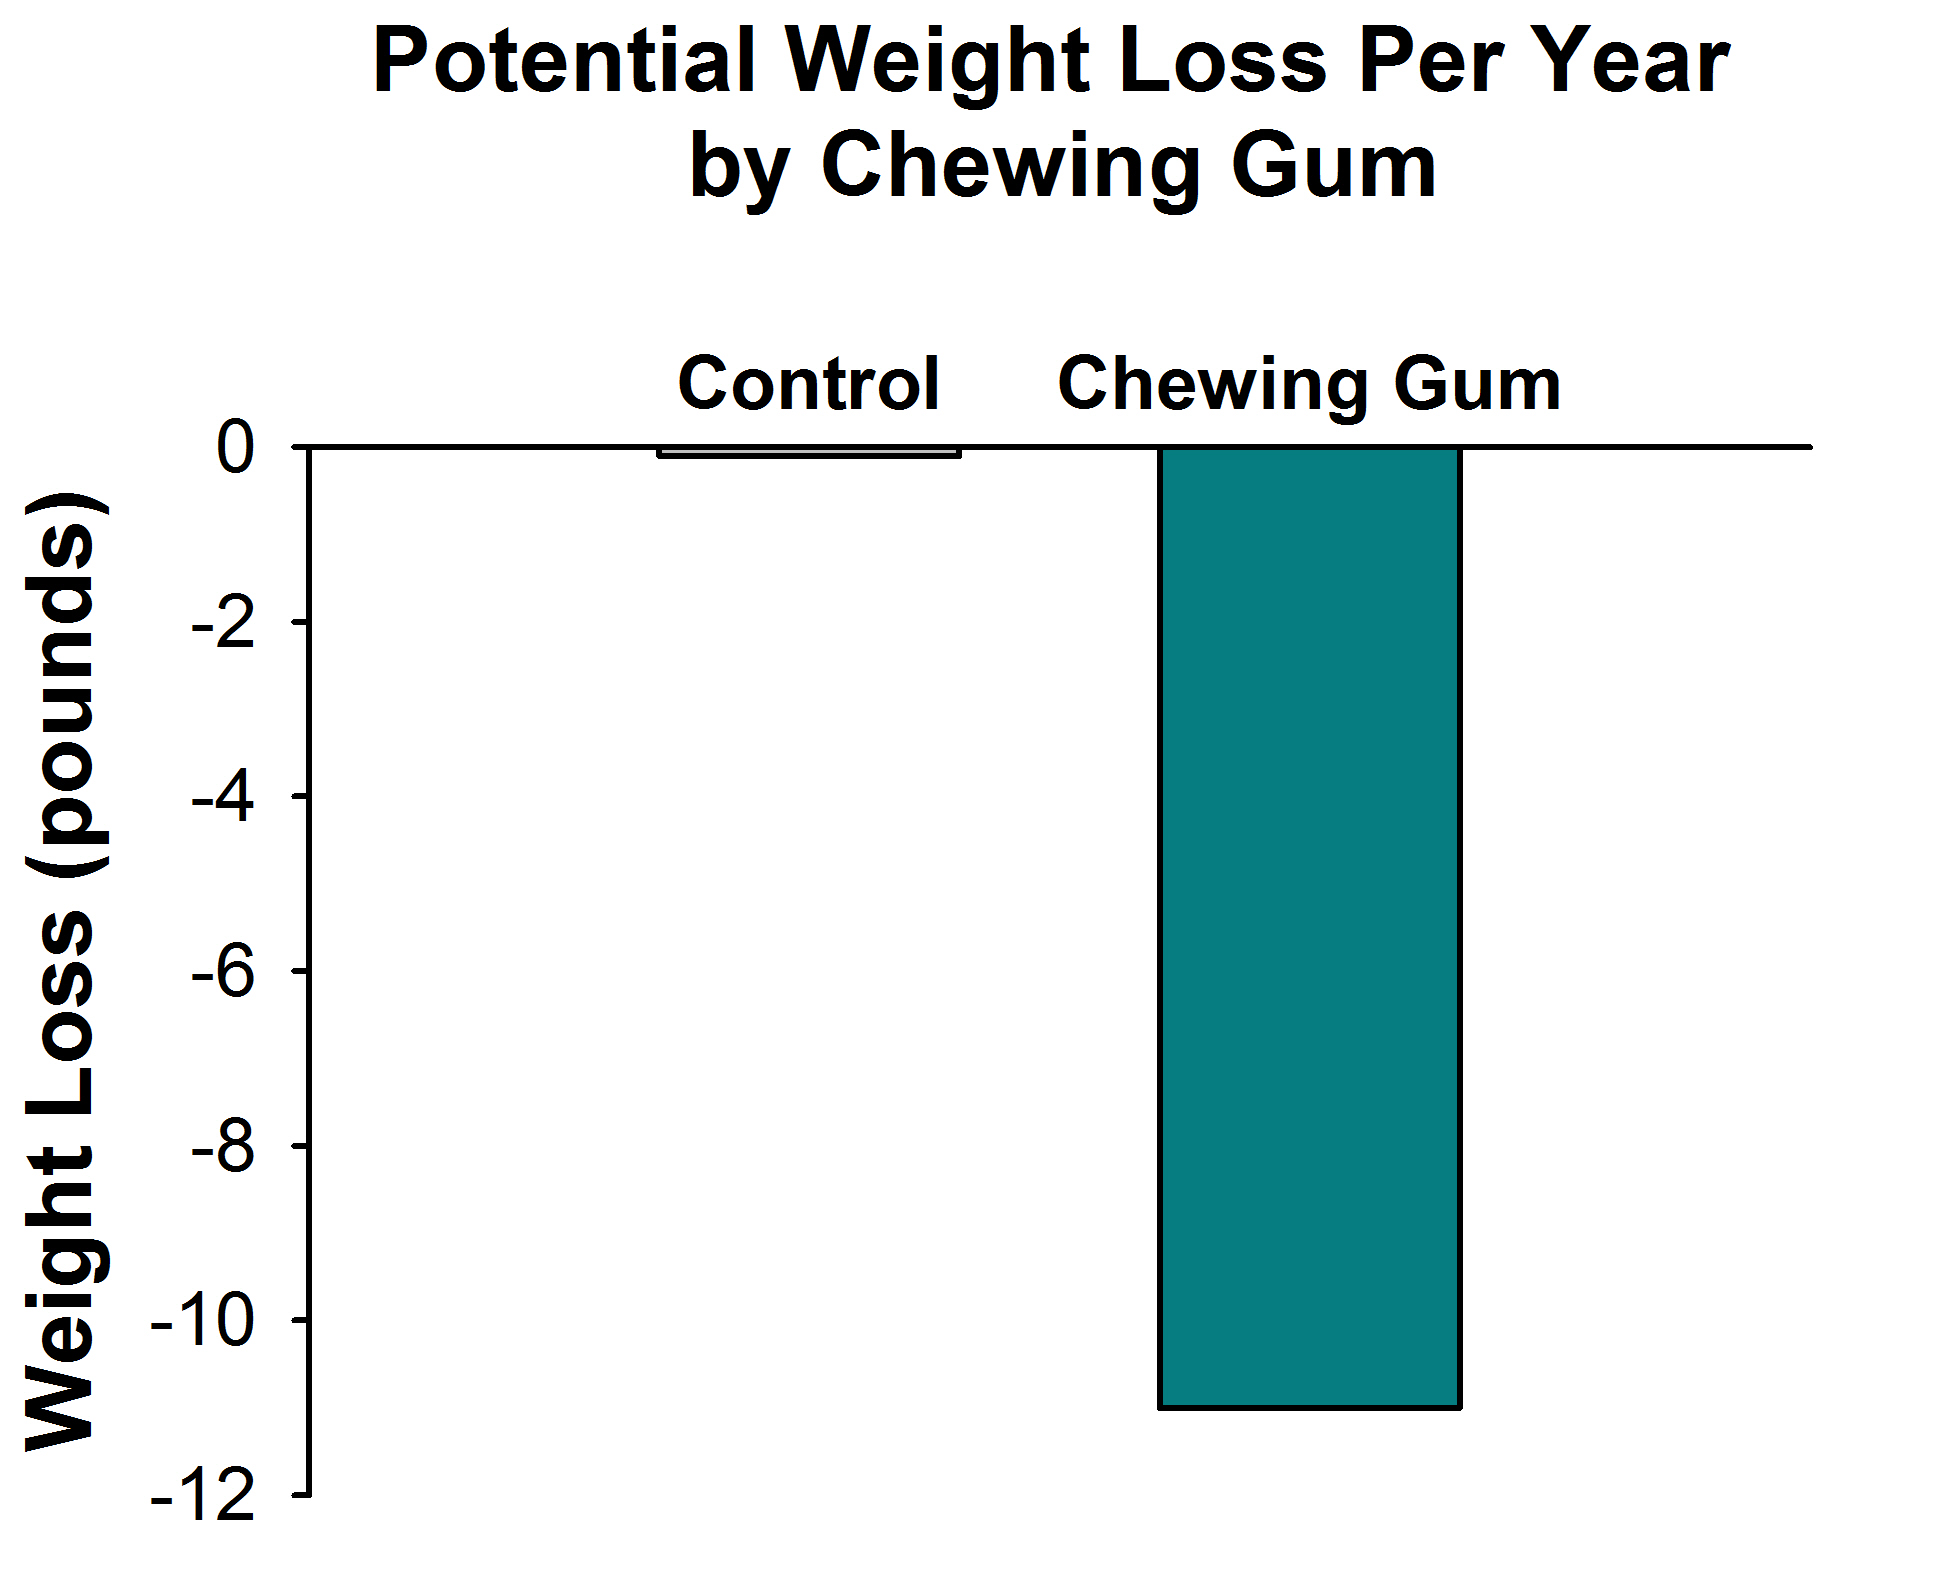 Potential_Weight_Loss_per_Year_with_chewing_gum--Levine_1999_NEJM.jpg